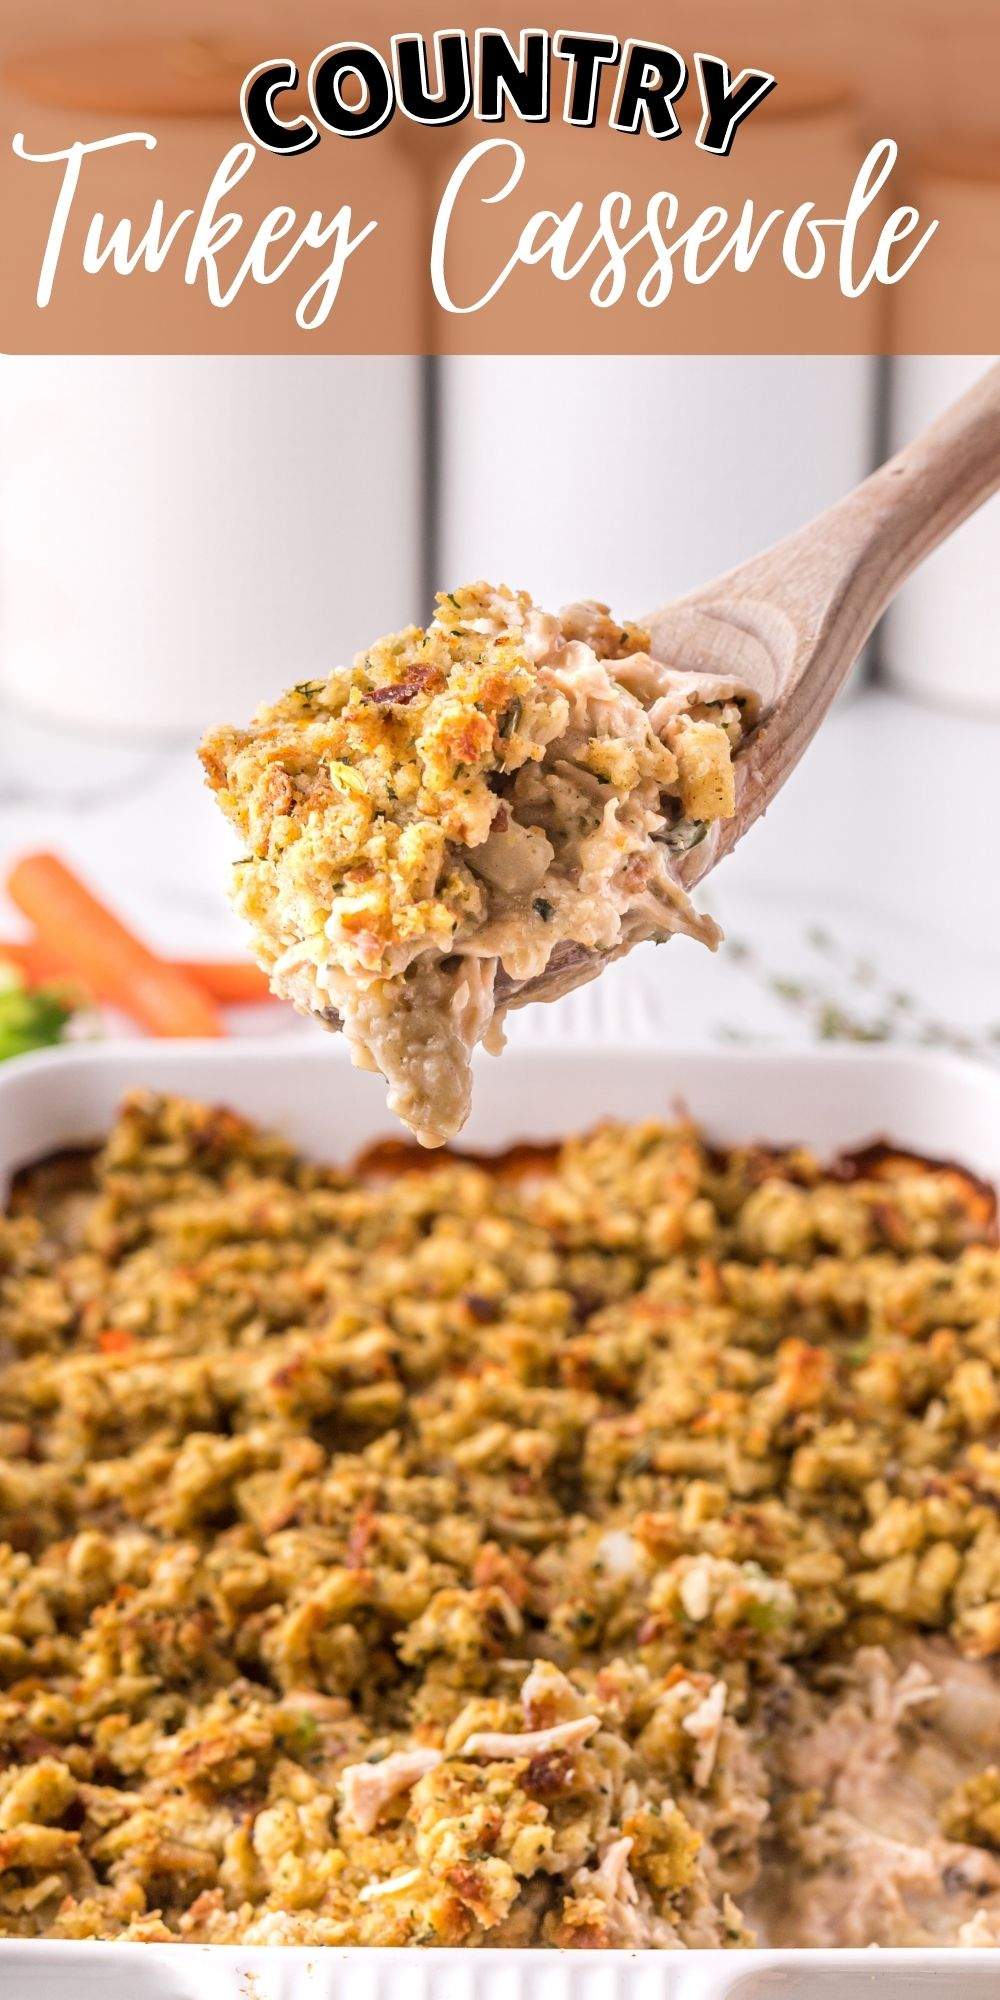 This Country Turkey Casserole is the perfect casserole that you can make with all the leftovers in your fridge. via @familyfresh